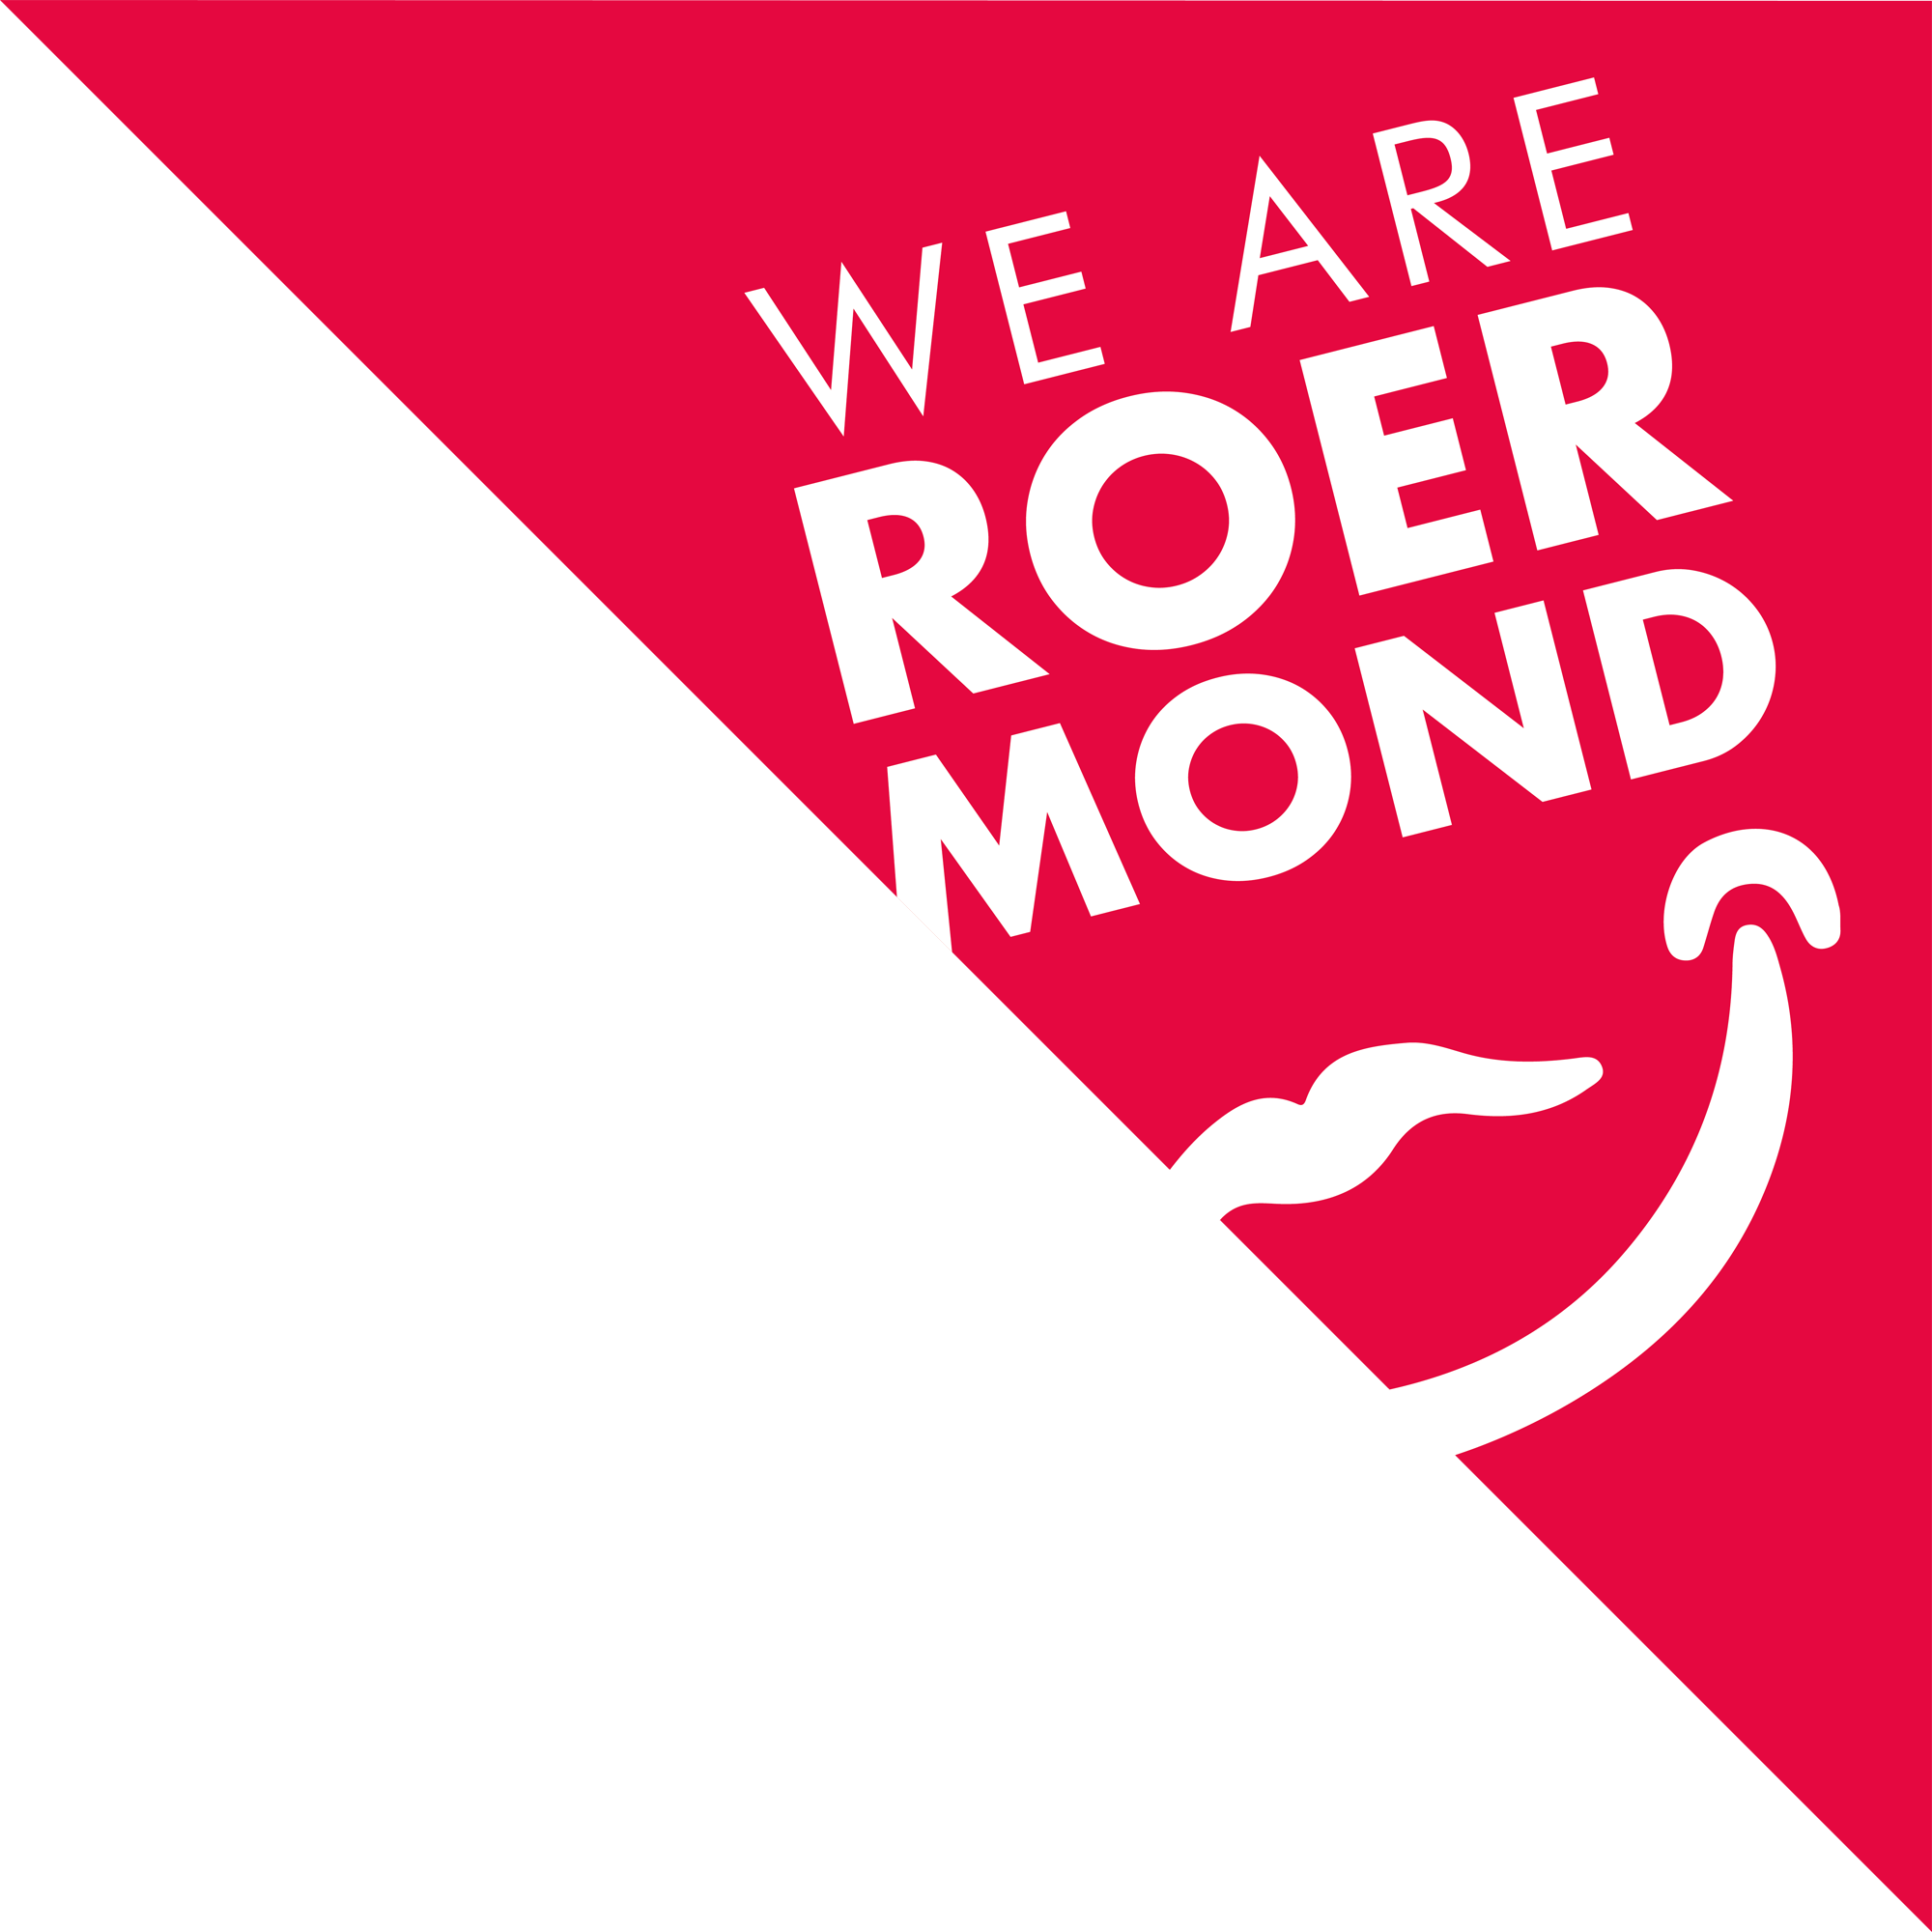 We are roermond